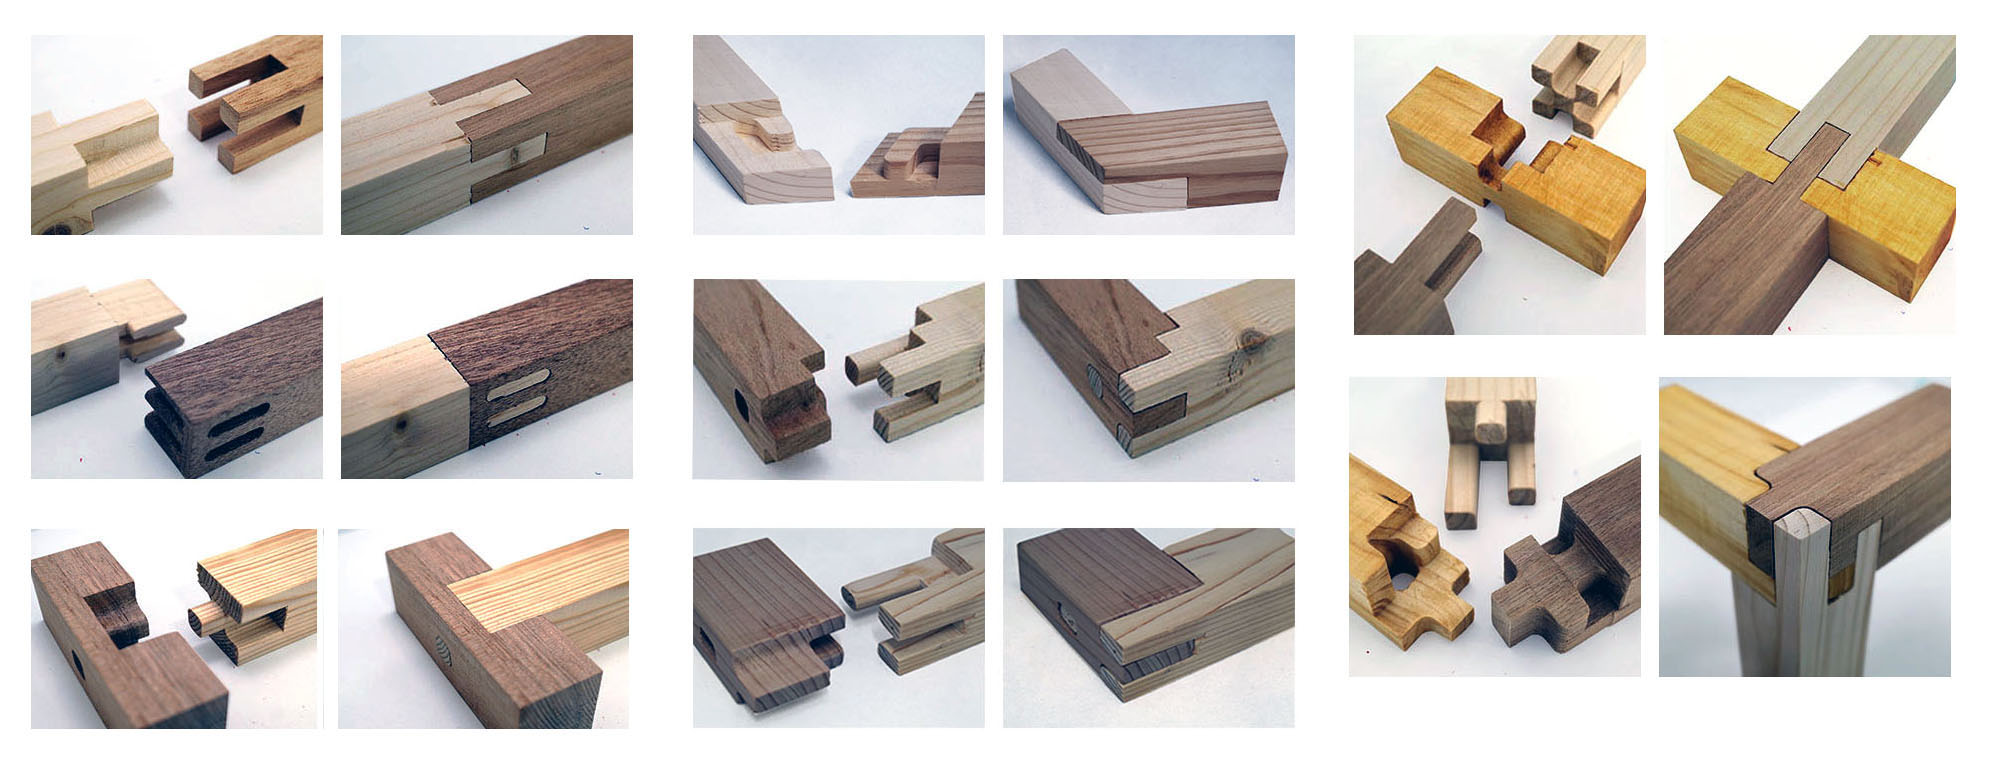 Simple Software Creates Complex Wooden Joints – An interactive system to design and fabricate structurally sound wood joints